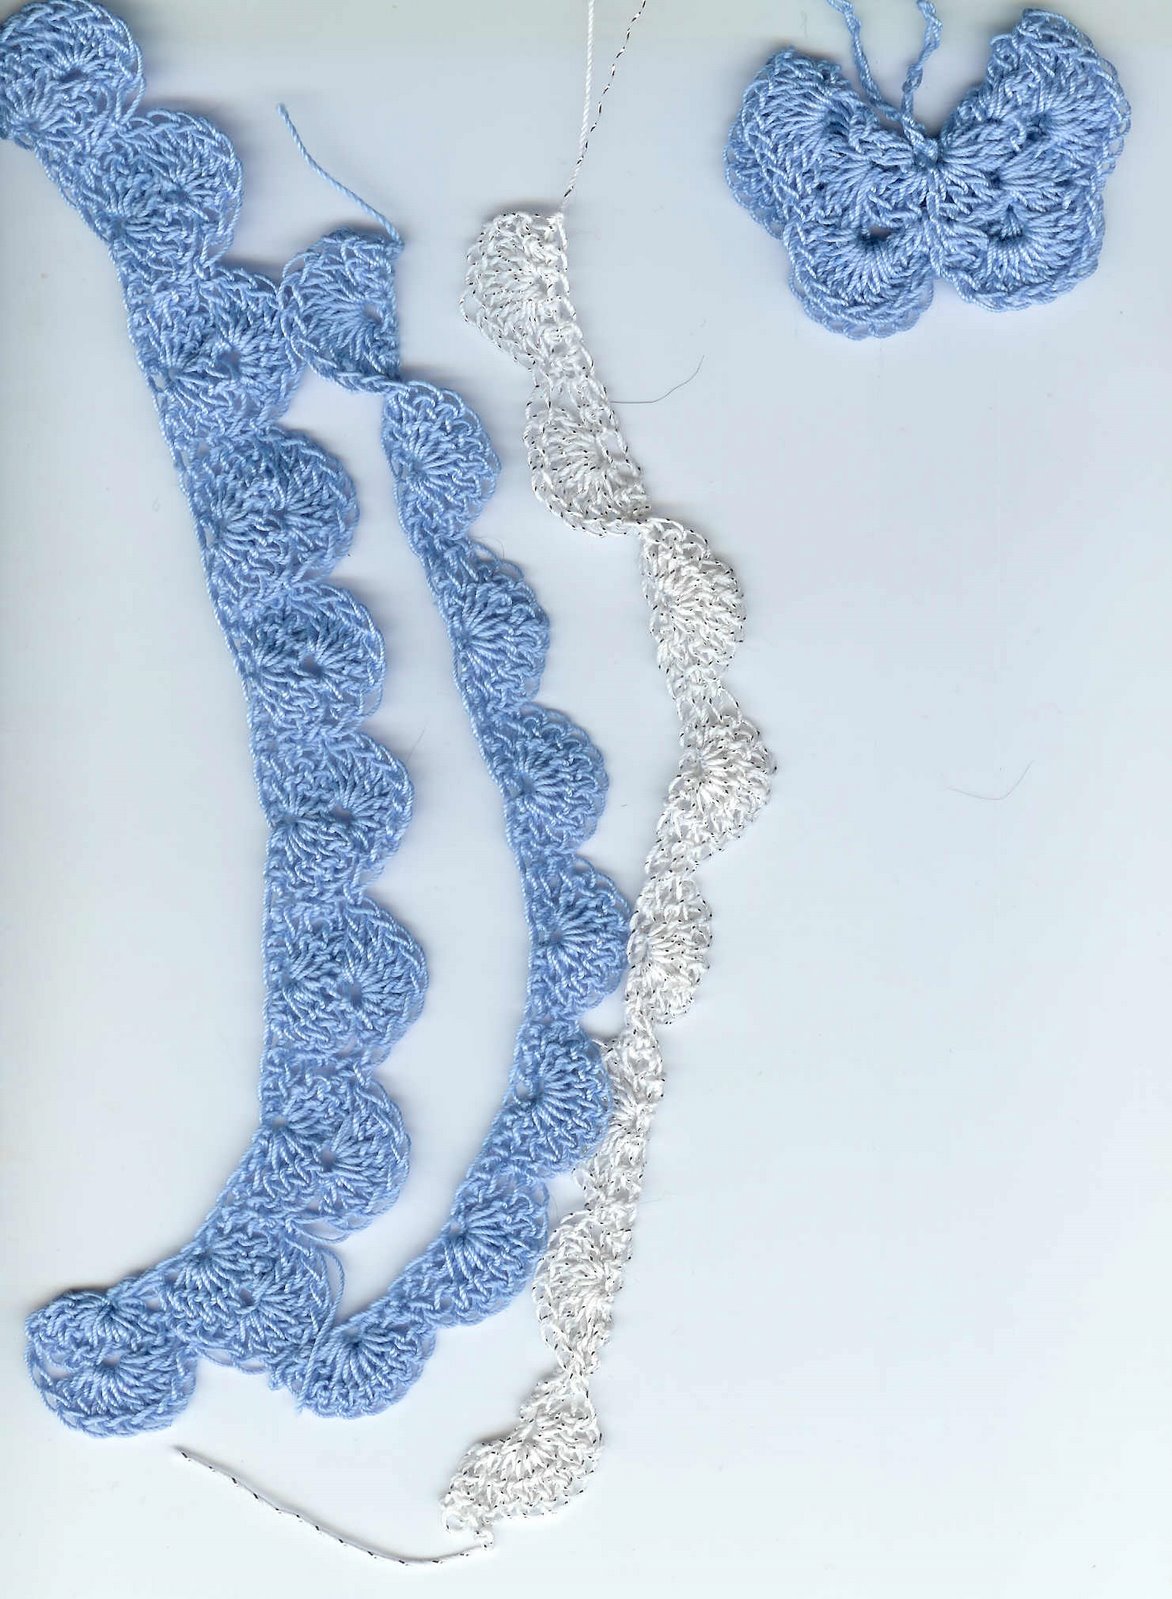 [crocheted+lace+for+edgings+and+butterfly.jpg]